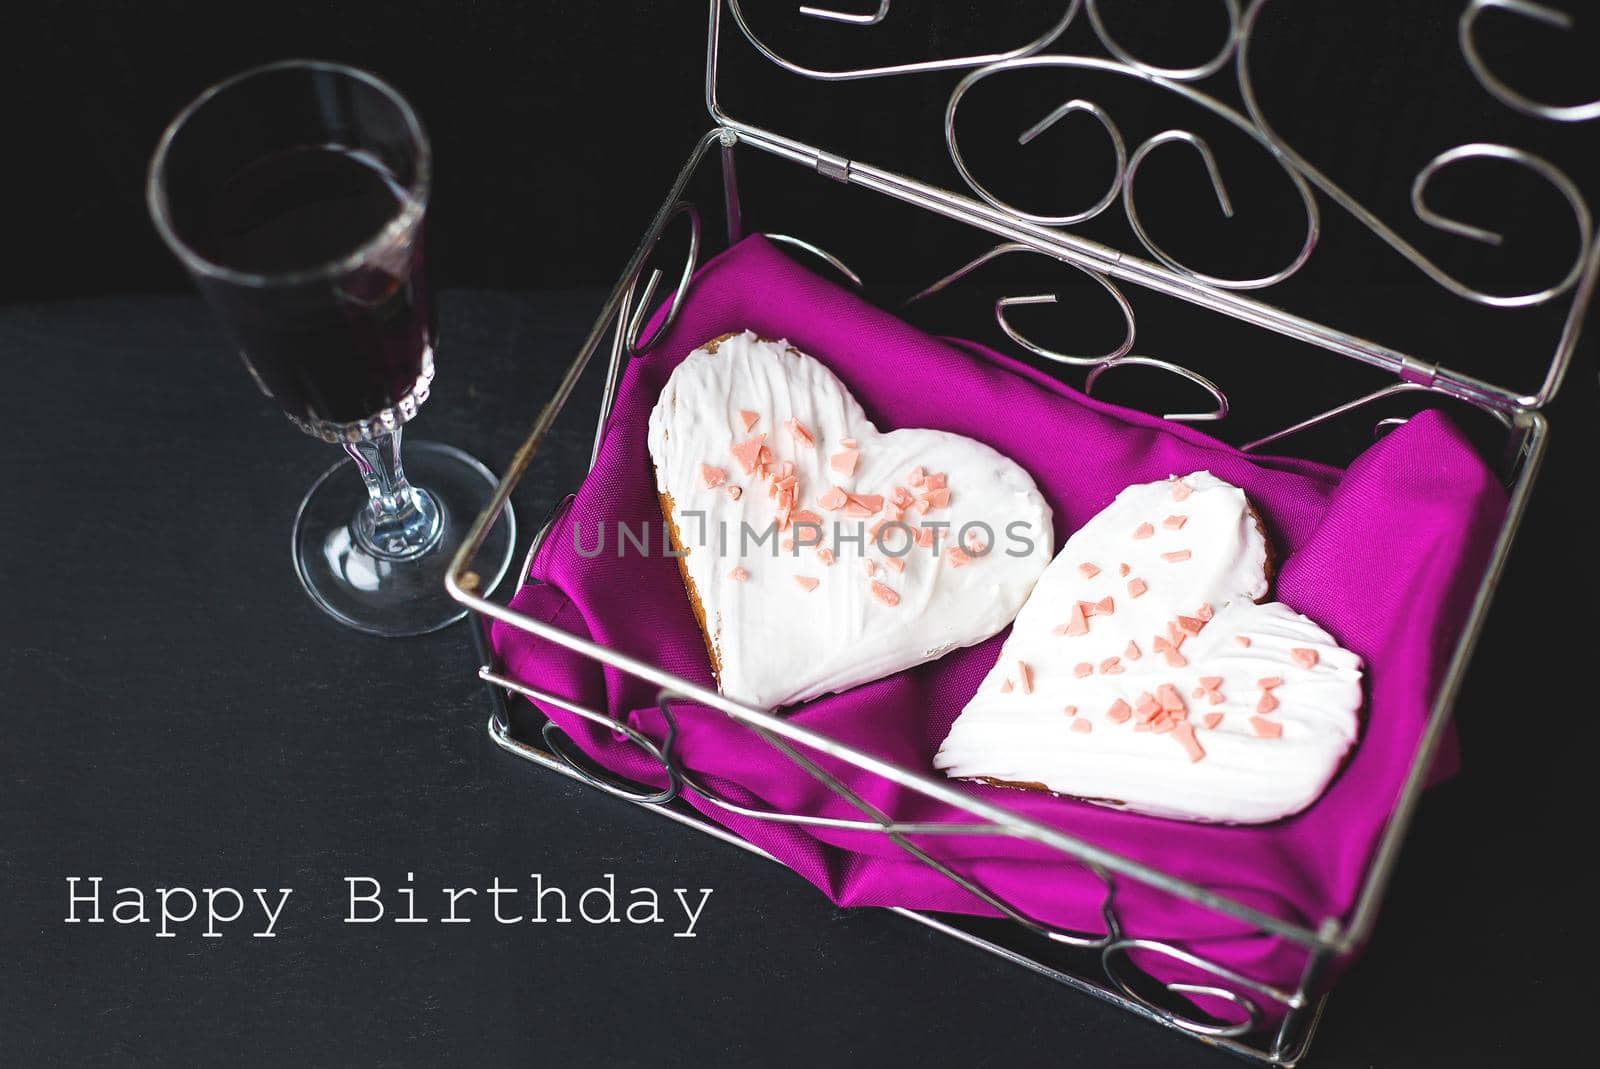 Cookies in the form of heart lies in a casket with a pink towel - inscription happy birthday